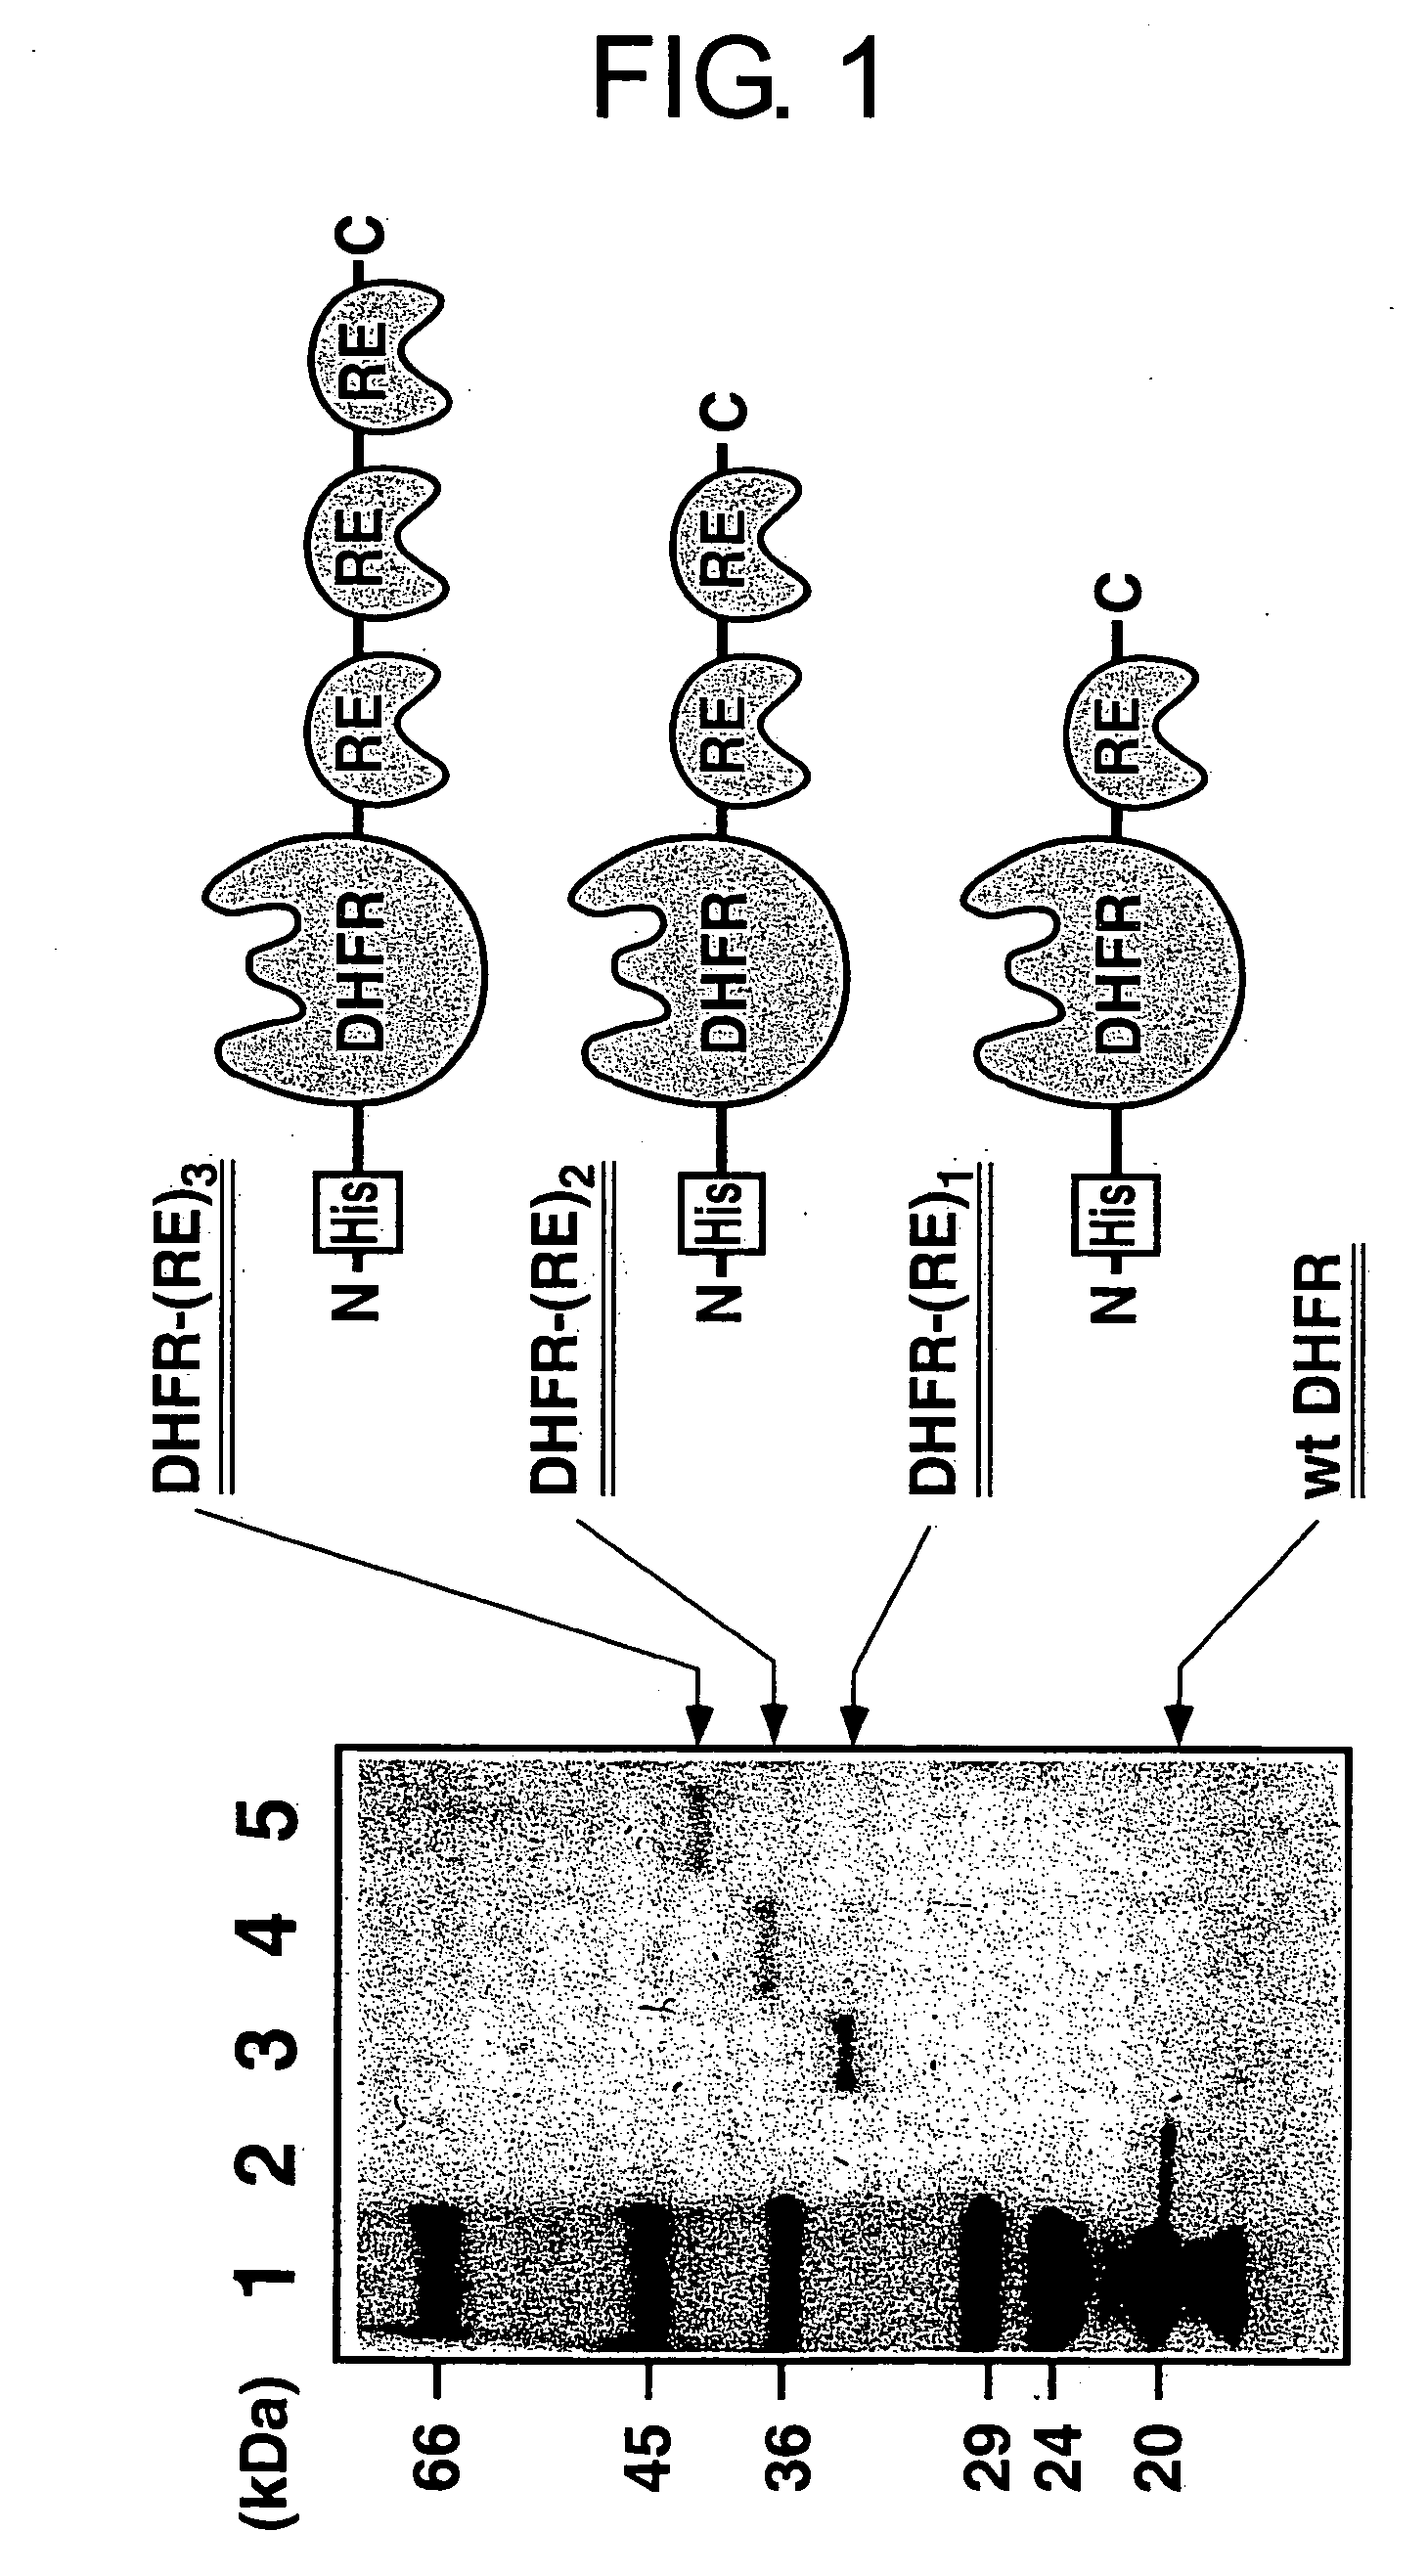 Method for forming a stable complex comprising a transcription product and translation product of a dna encoding a desired polypeptide, a nucleic acid construct used for the method, a complex formed by the method, and screening of a functional protein and mrna or dna encoding the protein using the method